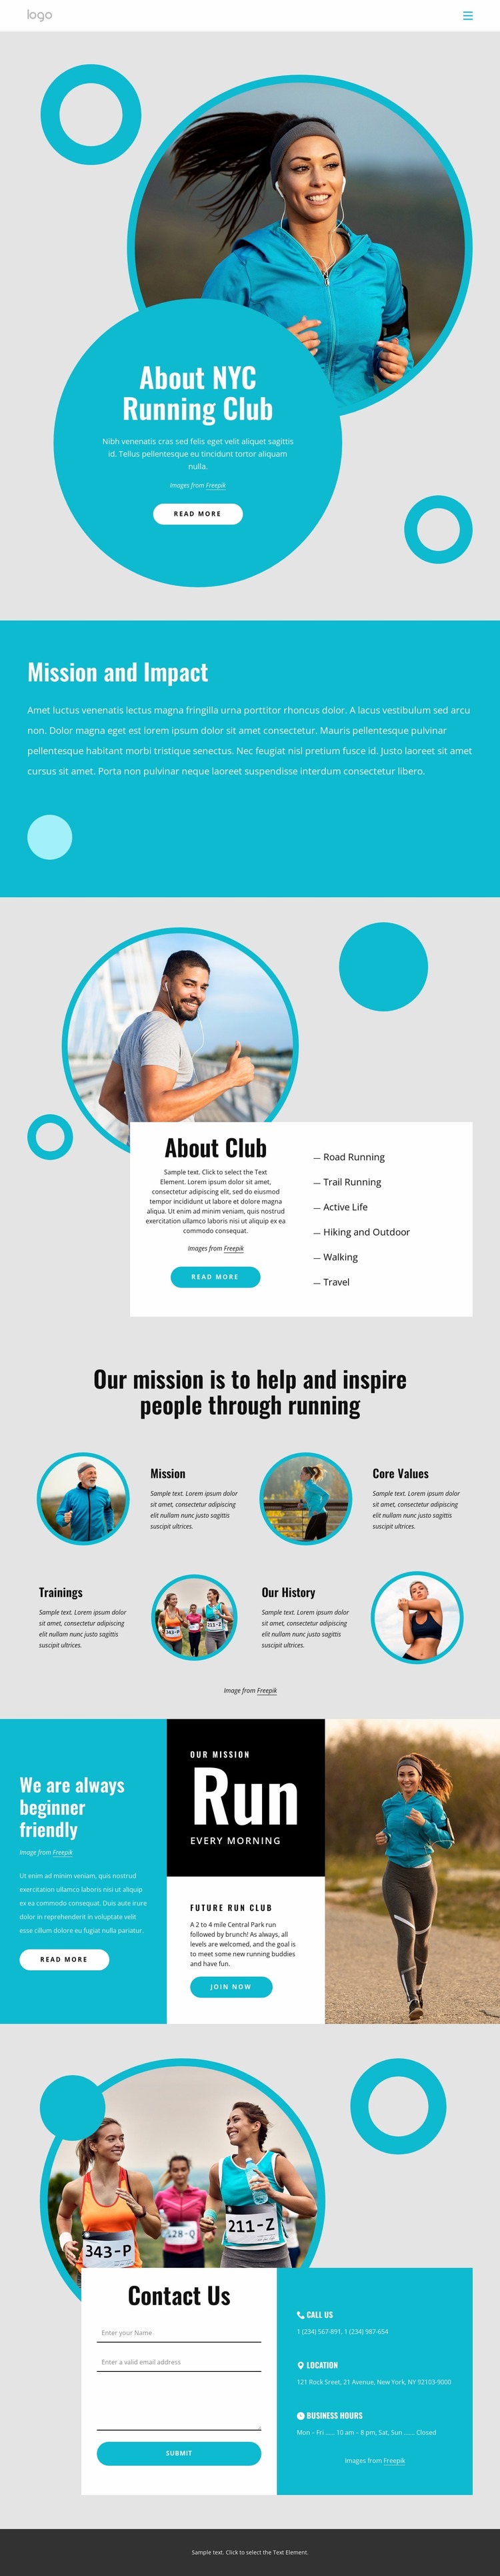 About NYC running club Html Website Builder